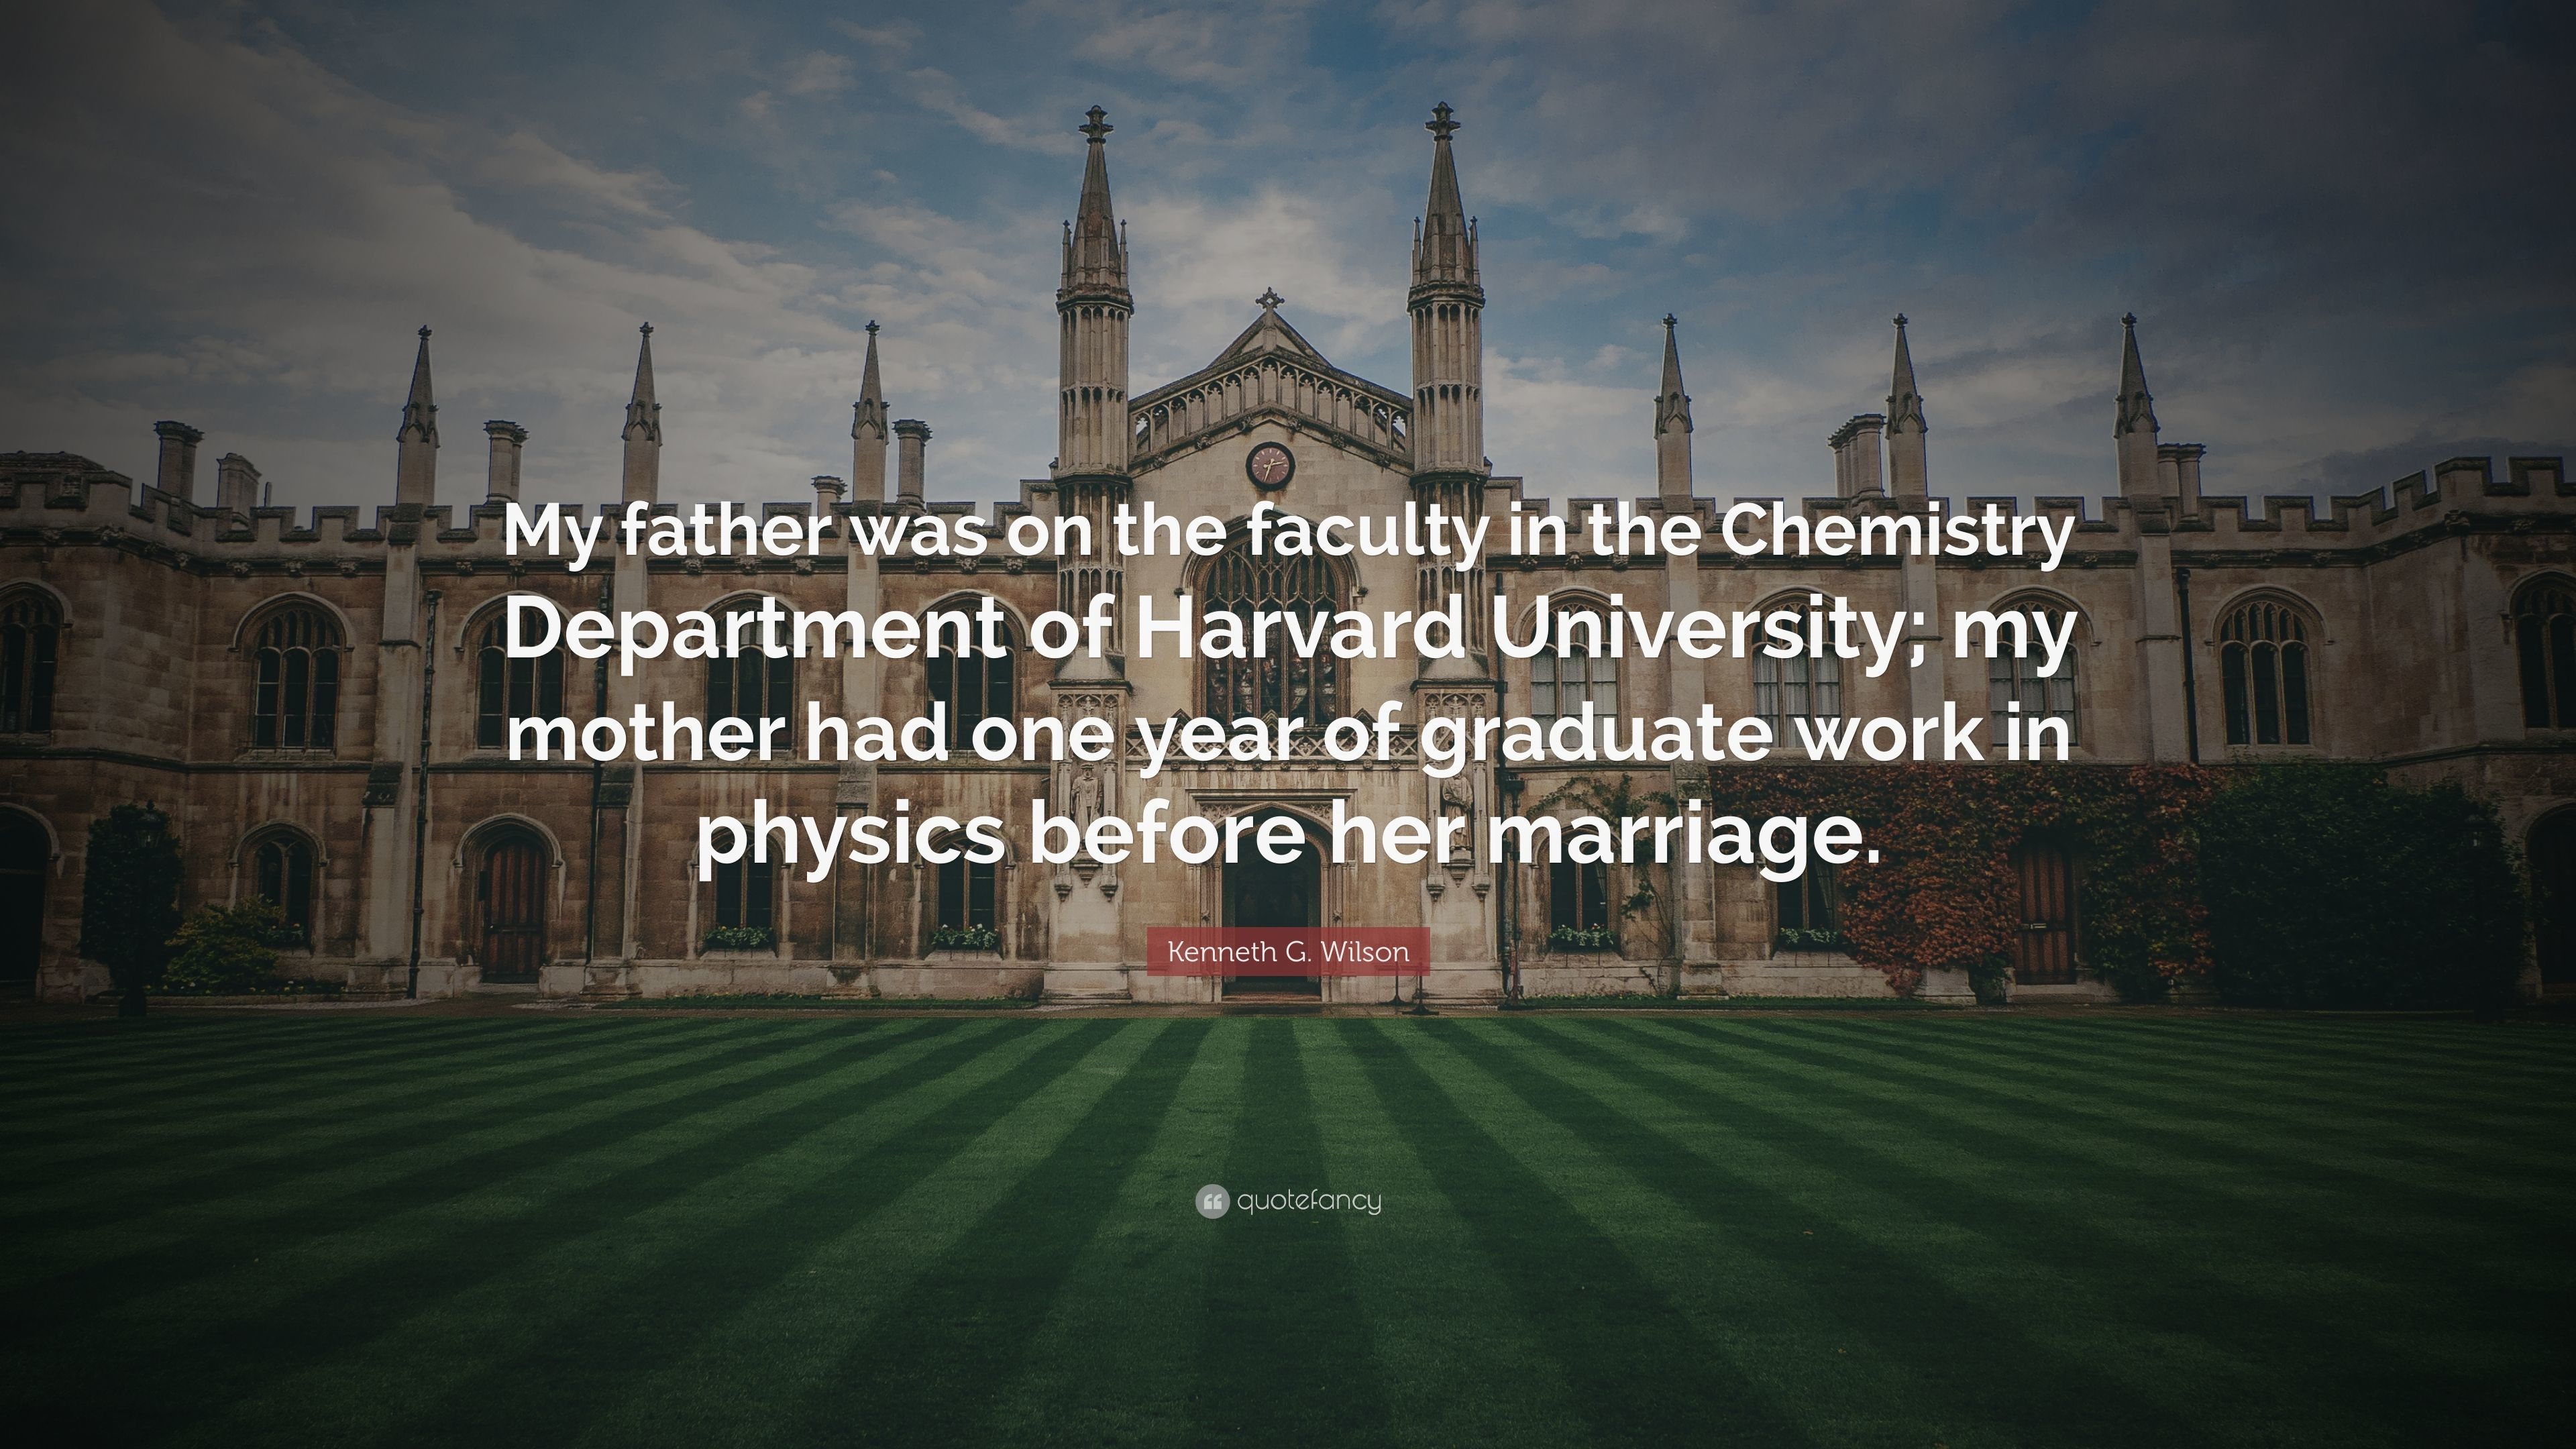 3840x2160 Kenneth G. Wilson Quote: “My father was on the faculty in the Chemistry